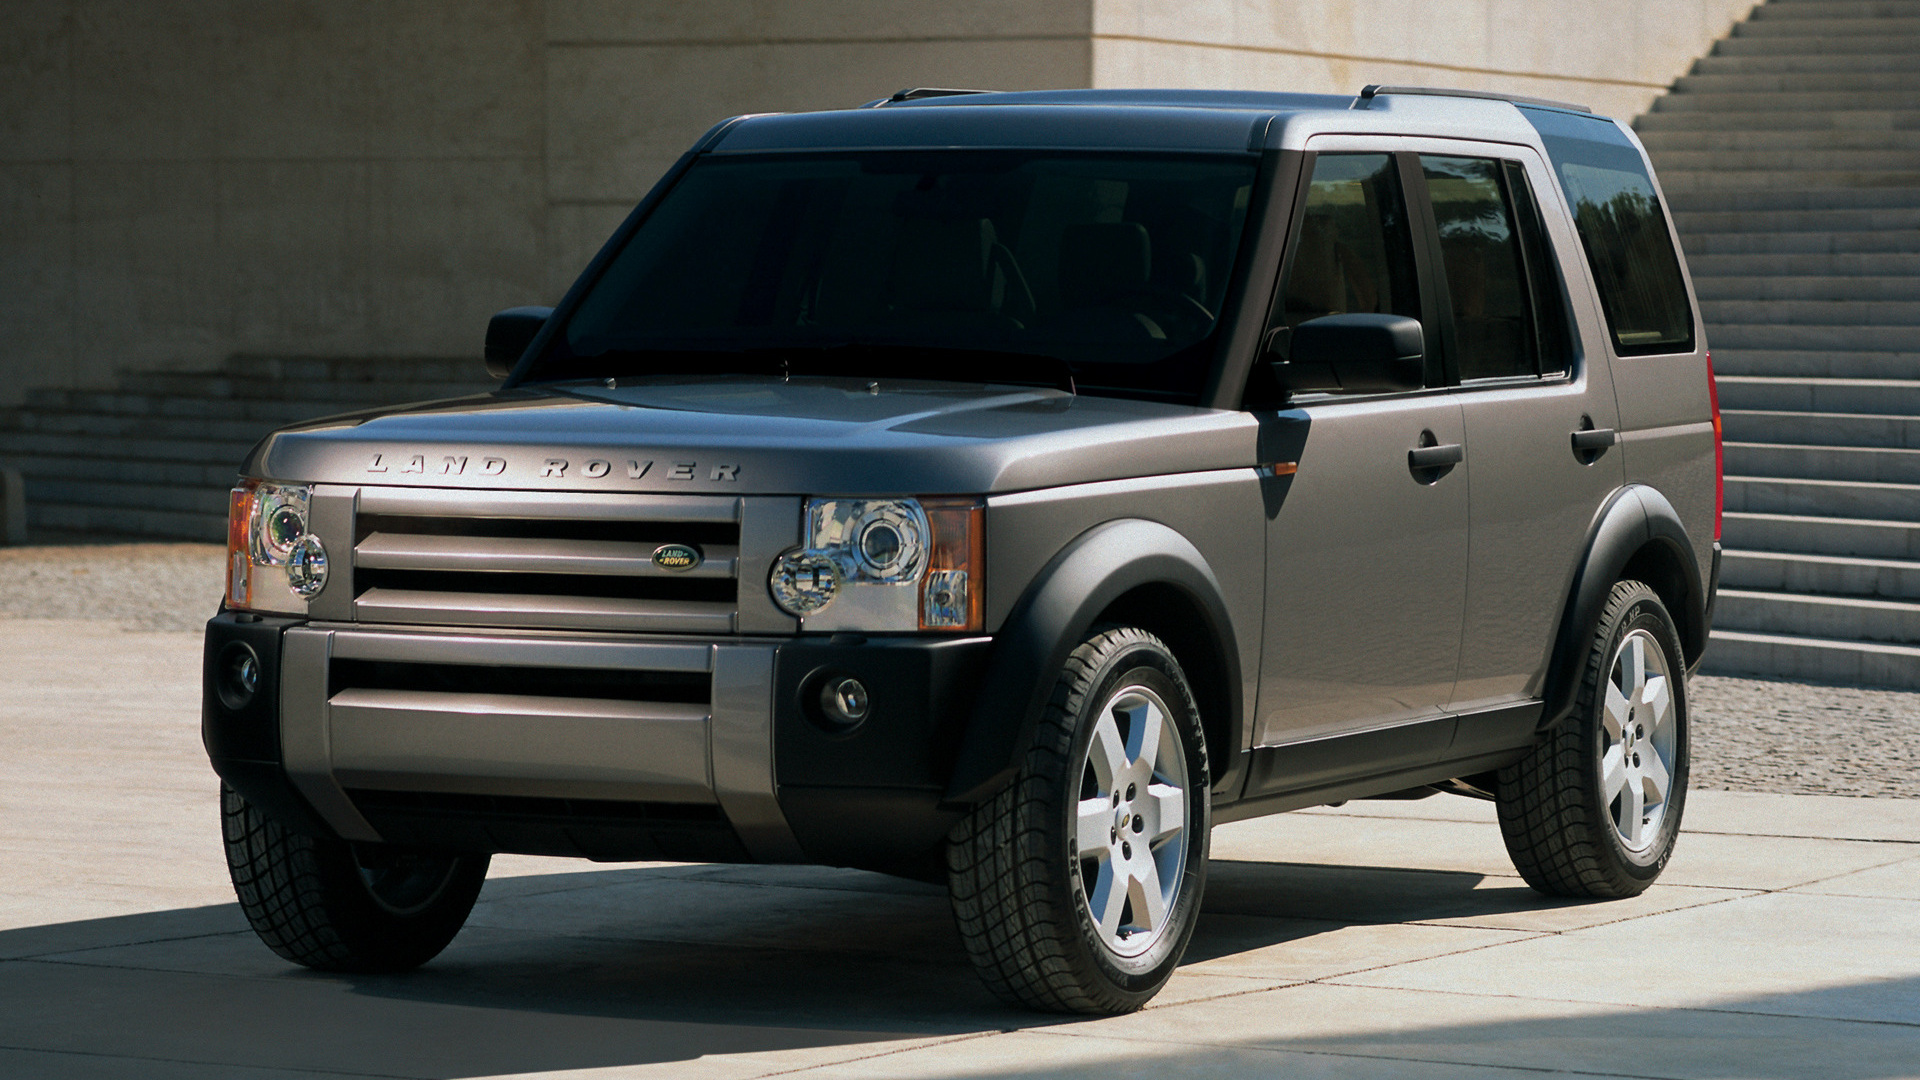 Land Rover Discovery 3 (2004) Wallpapers and HD Images